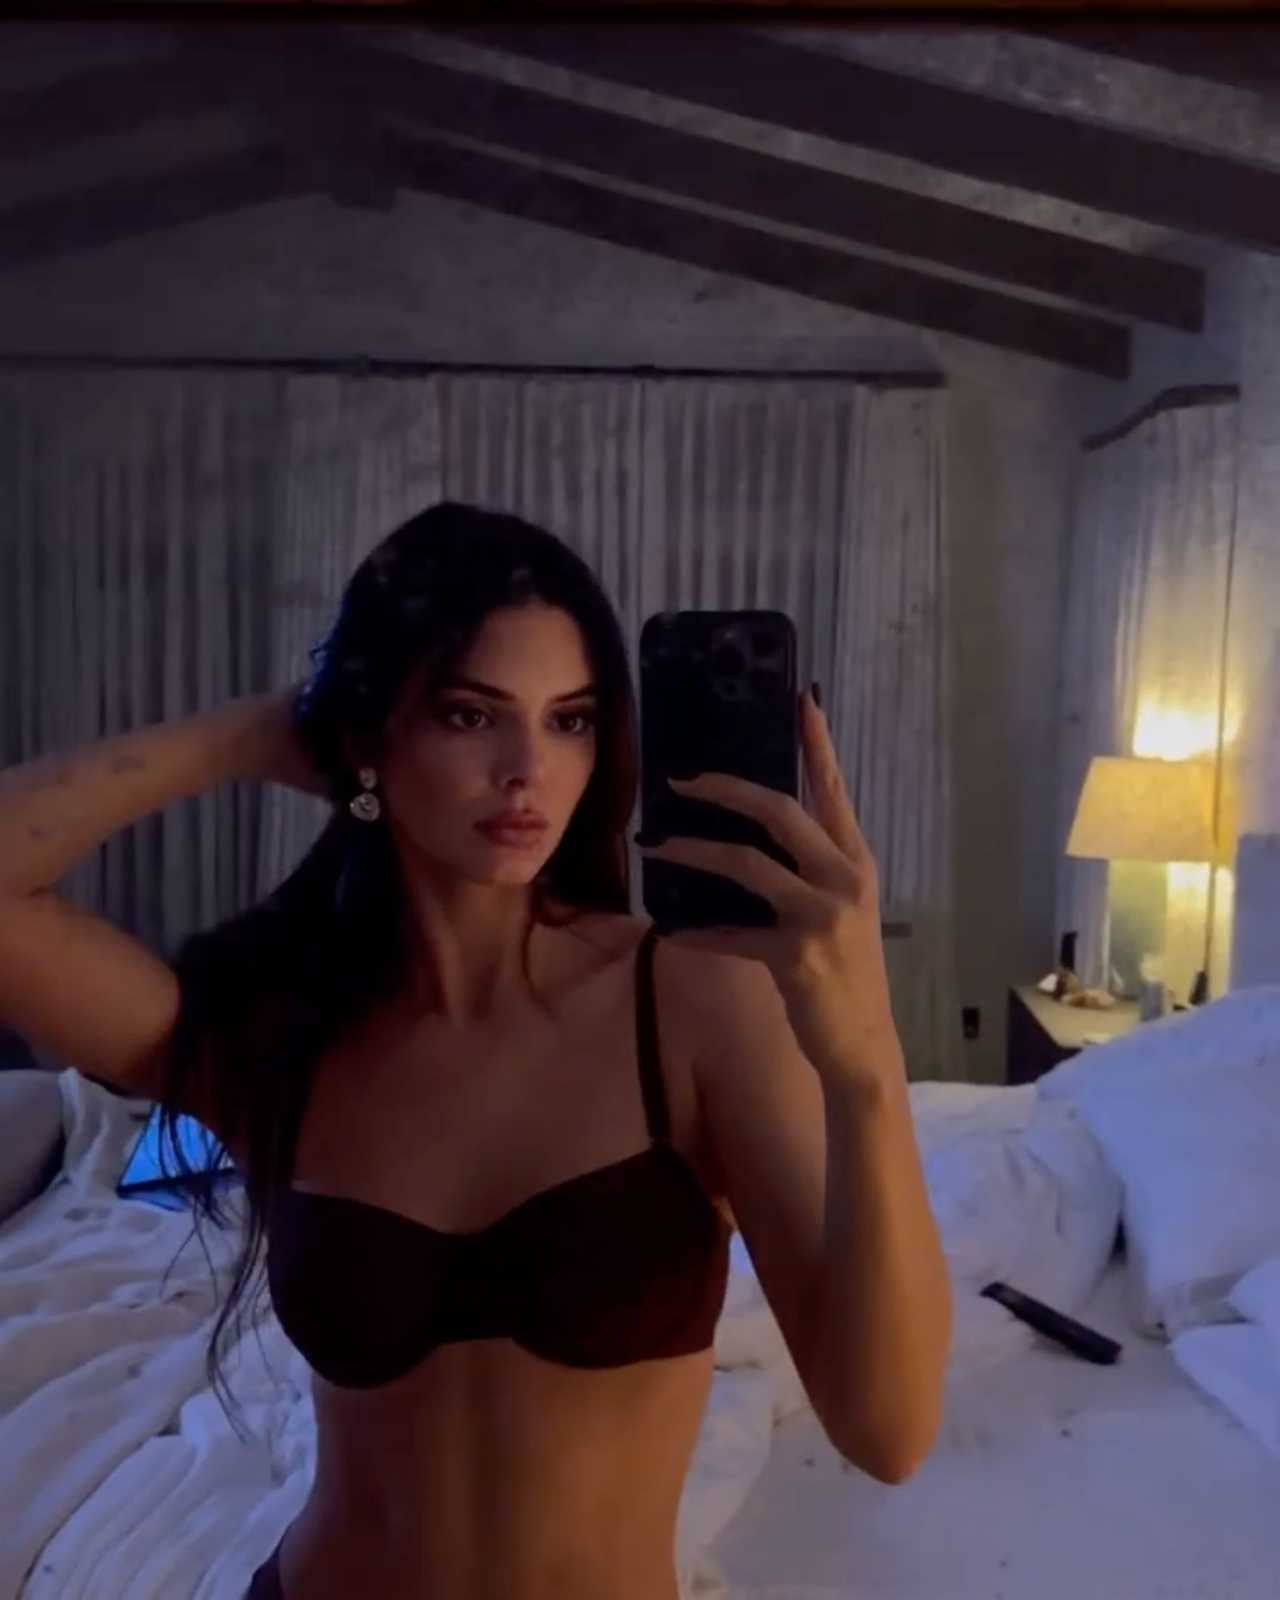 Kendall Jenner goes topless and shows off major underboob in NSFW new video after rumors model got ‘plastic surgery’